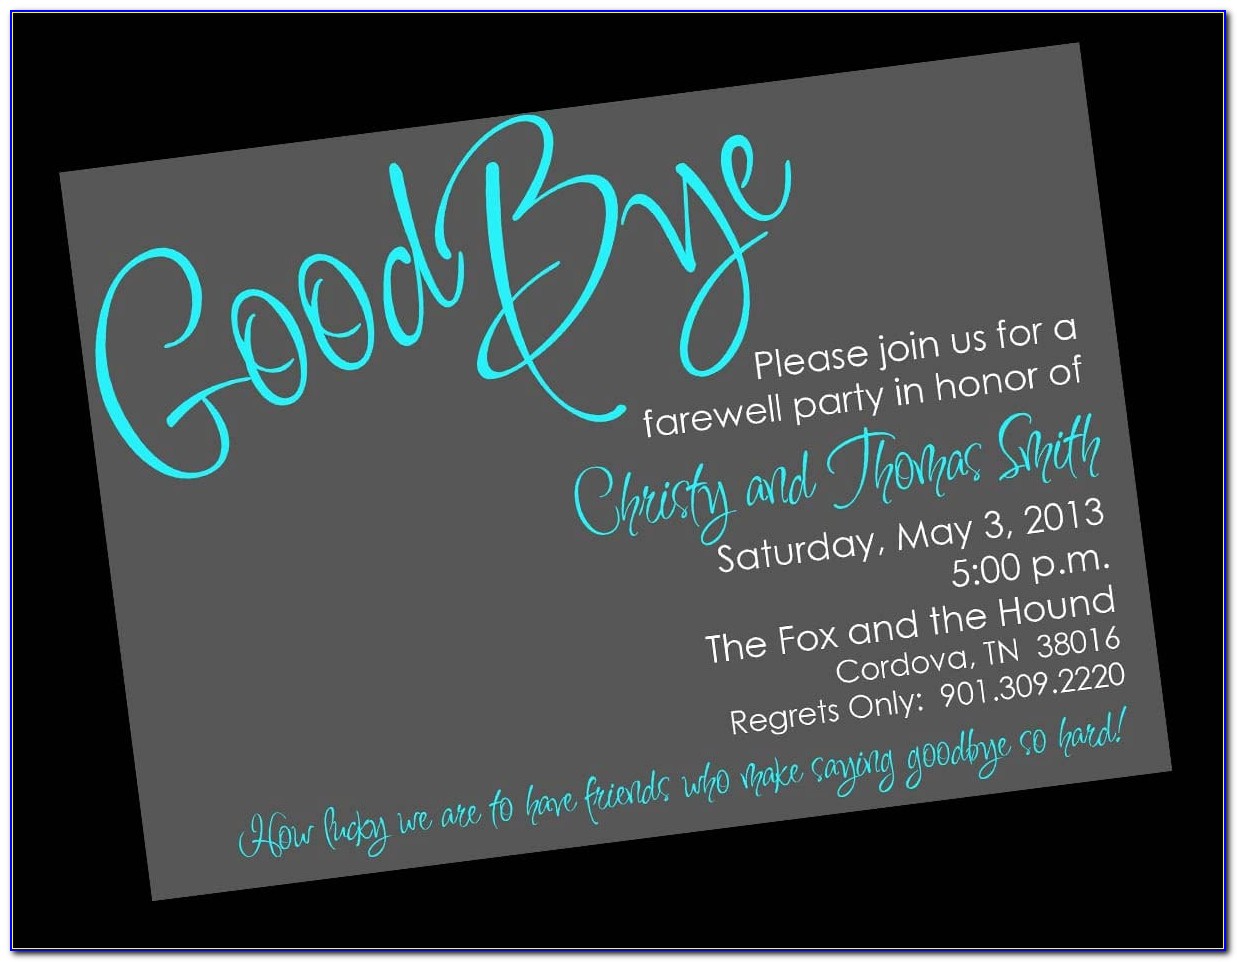 Going Away Invitations Free